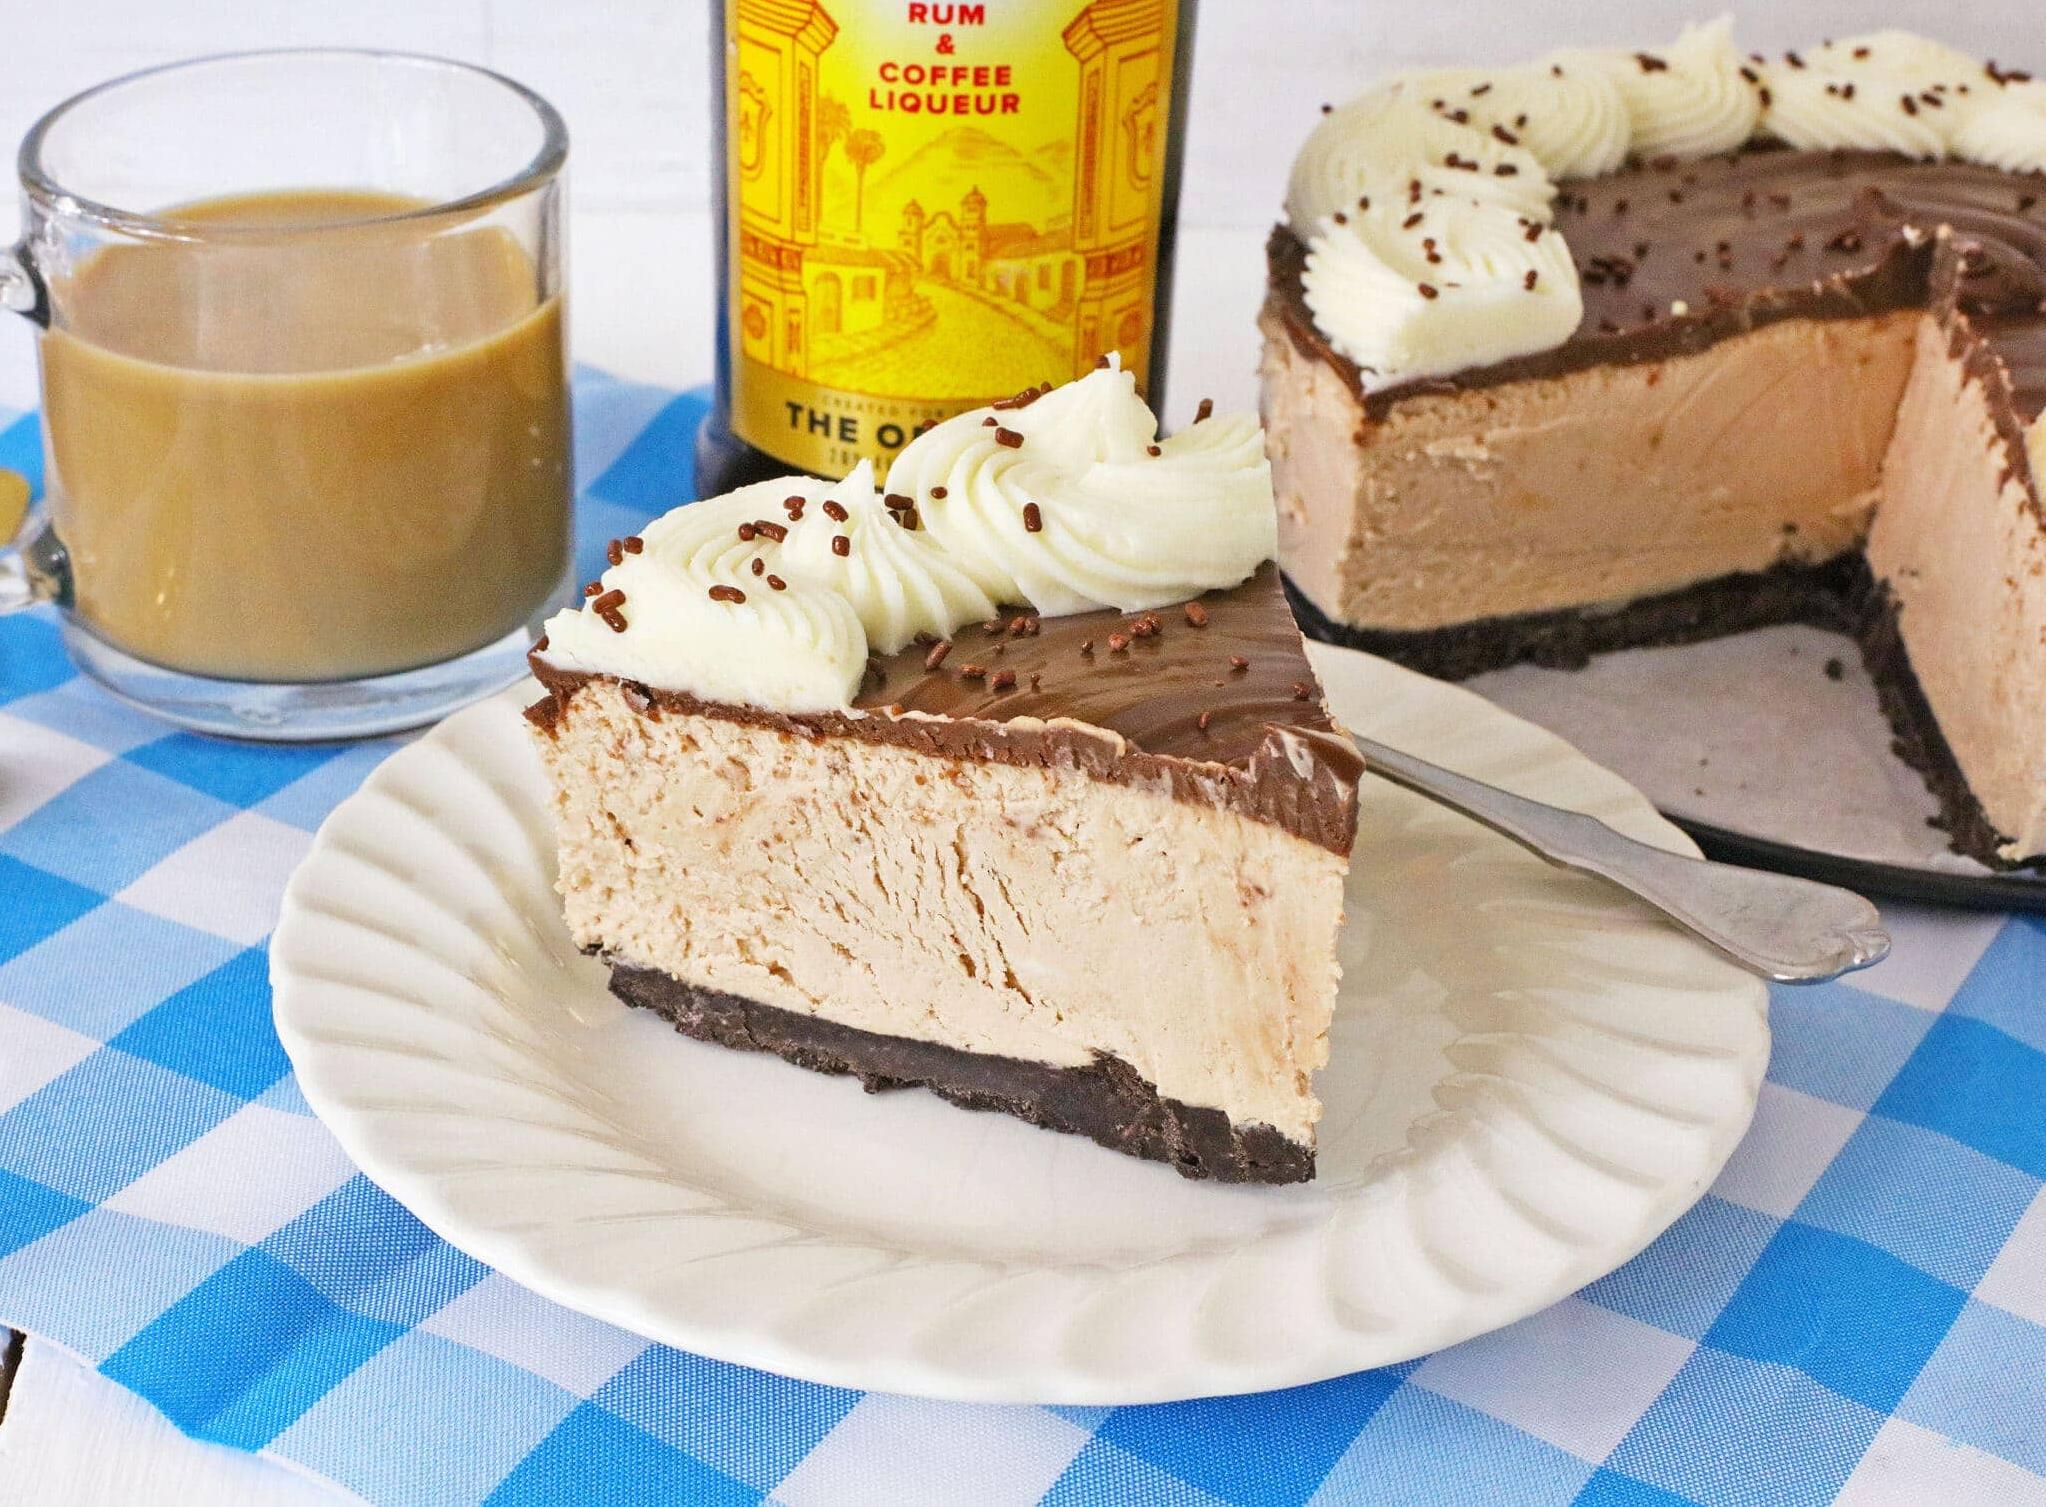  This creamy and decadent coffee liqueur cheesecake is a true showstopper!